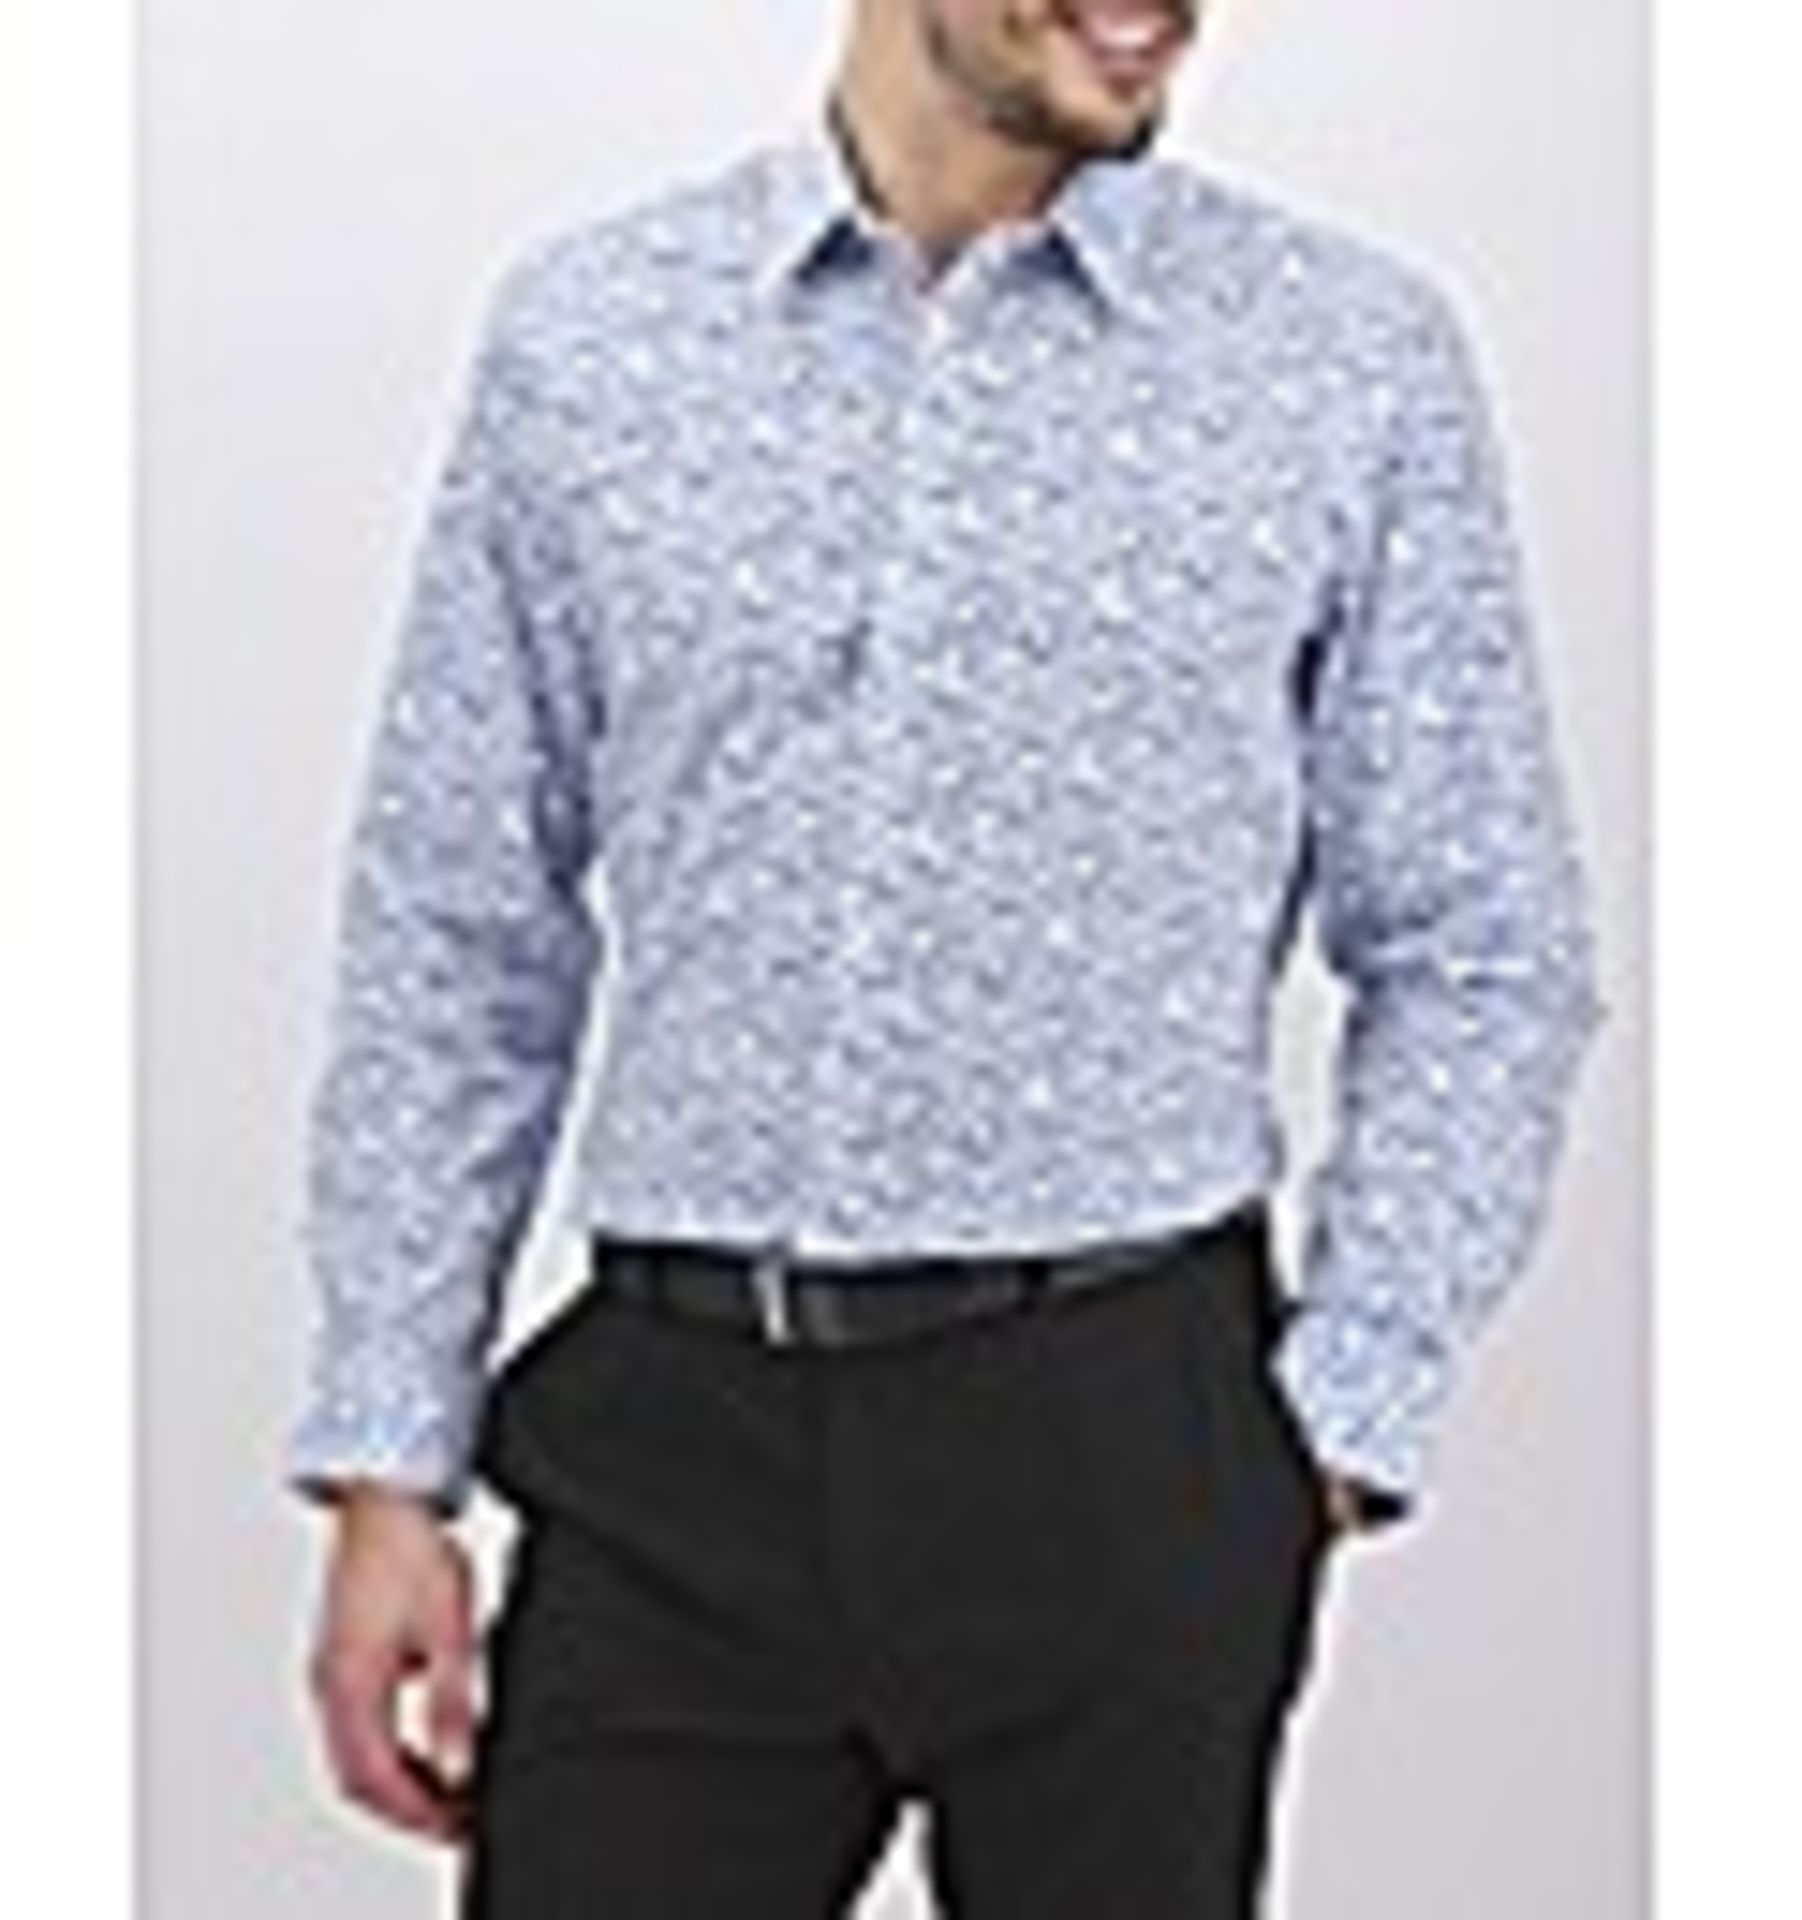 BRAND NEW PRINT FORMAL SHIRT SIZE M RRP £25Condition ReportBRAND NEW